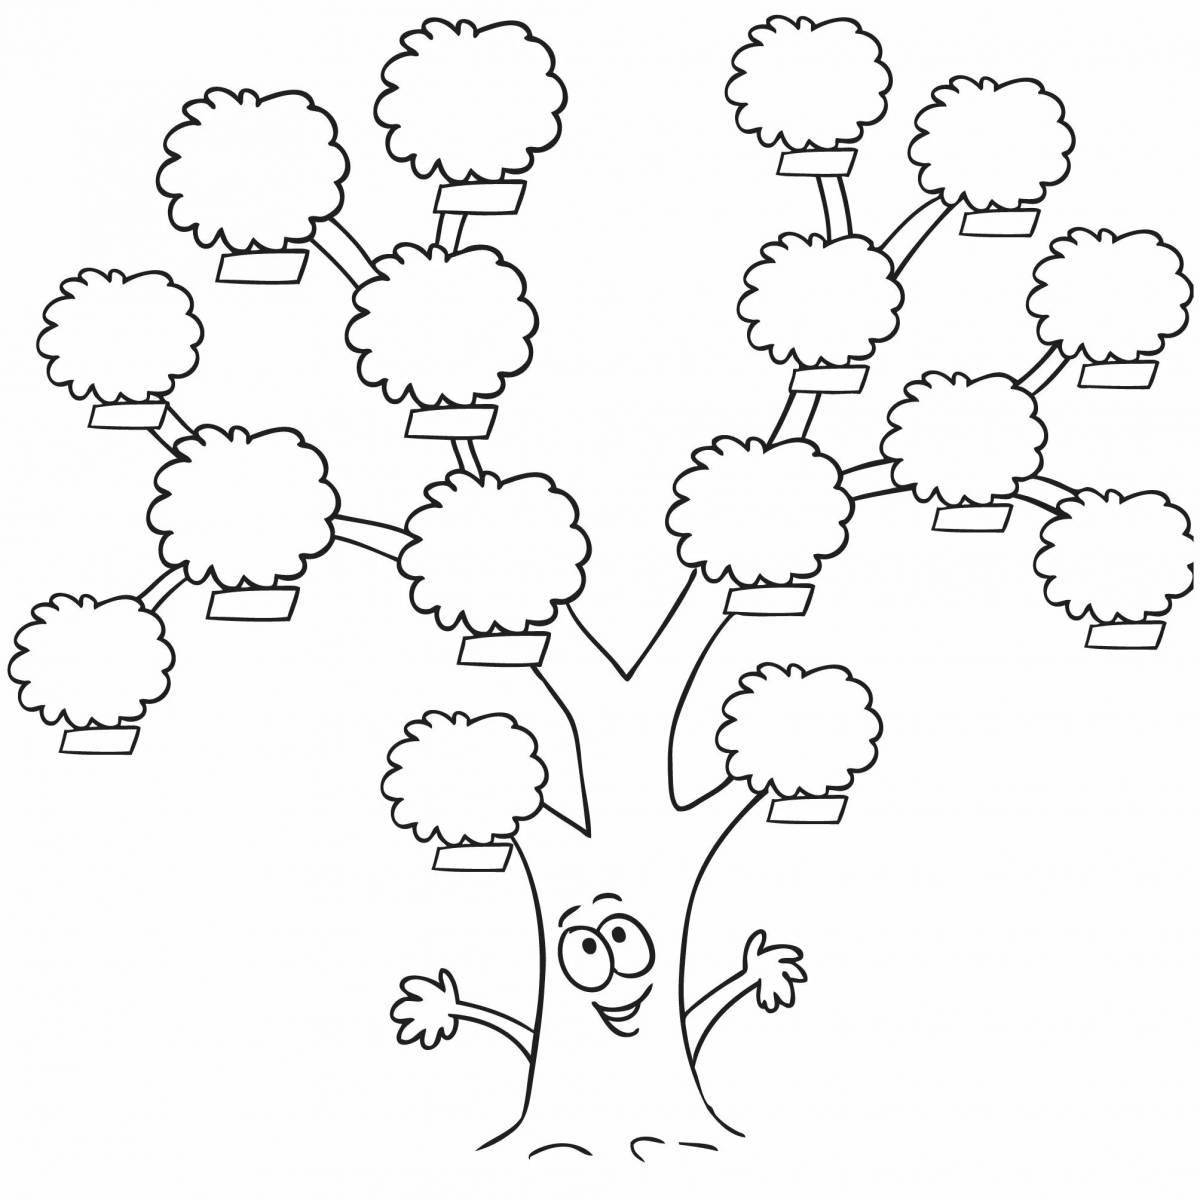 Creative family tree template for kids